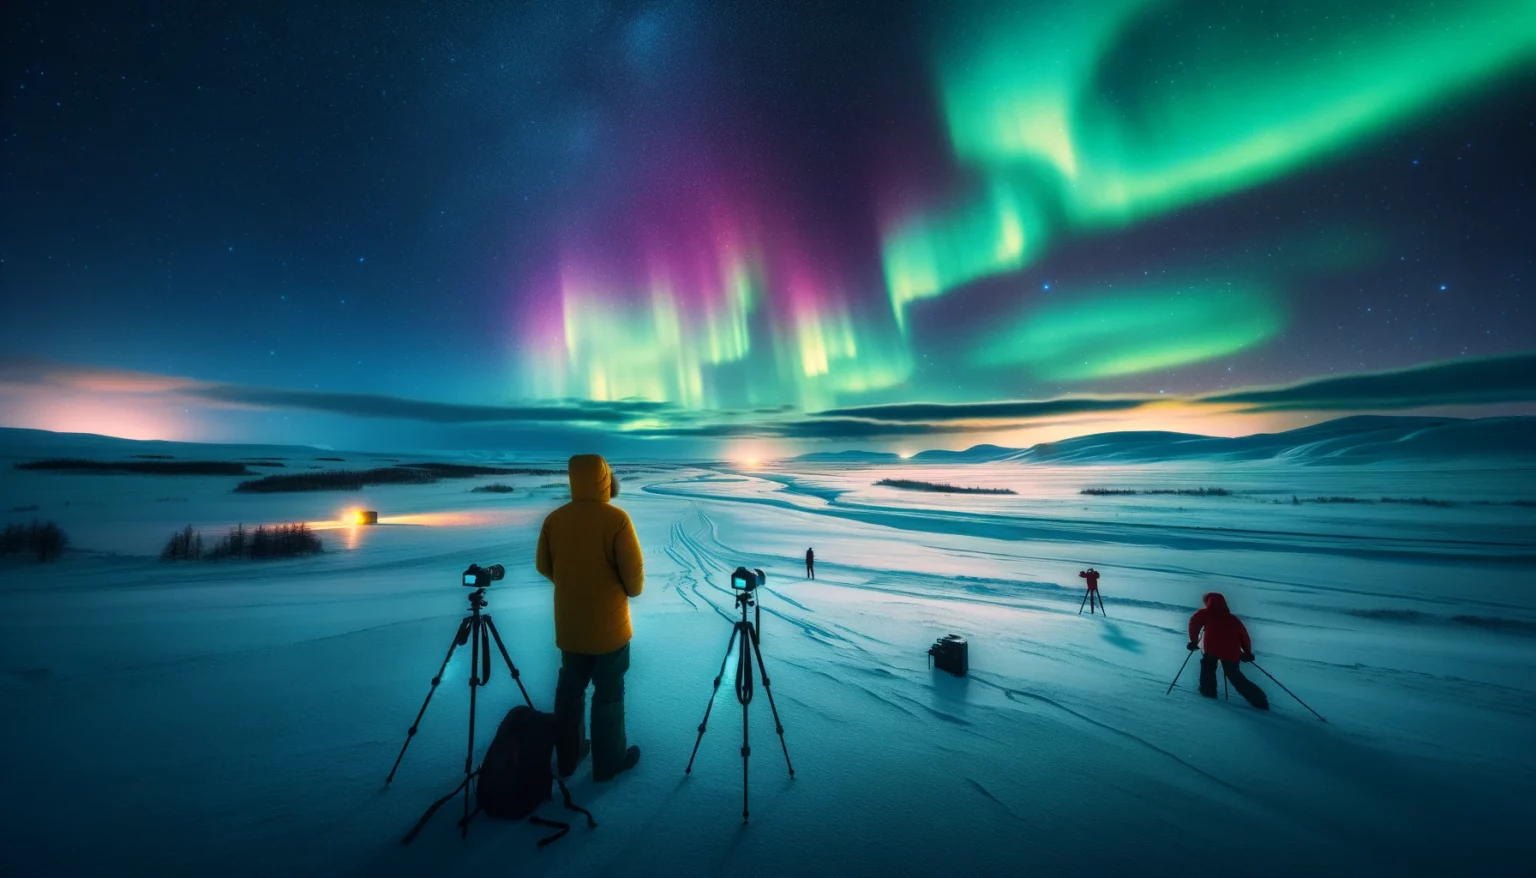 A panoramic night landscape under the aurora borealis, featuring a snow-covered plain illuminated by vibrant green, pink, and violet lights. Several spectators, dressed in winter clothing and using cameras on tripods, observe the celestial display from a remote, dark location.